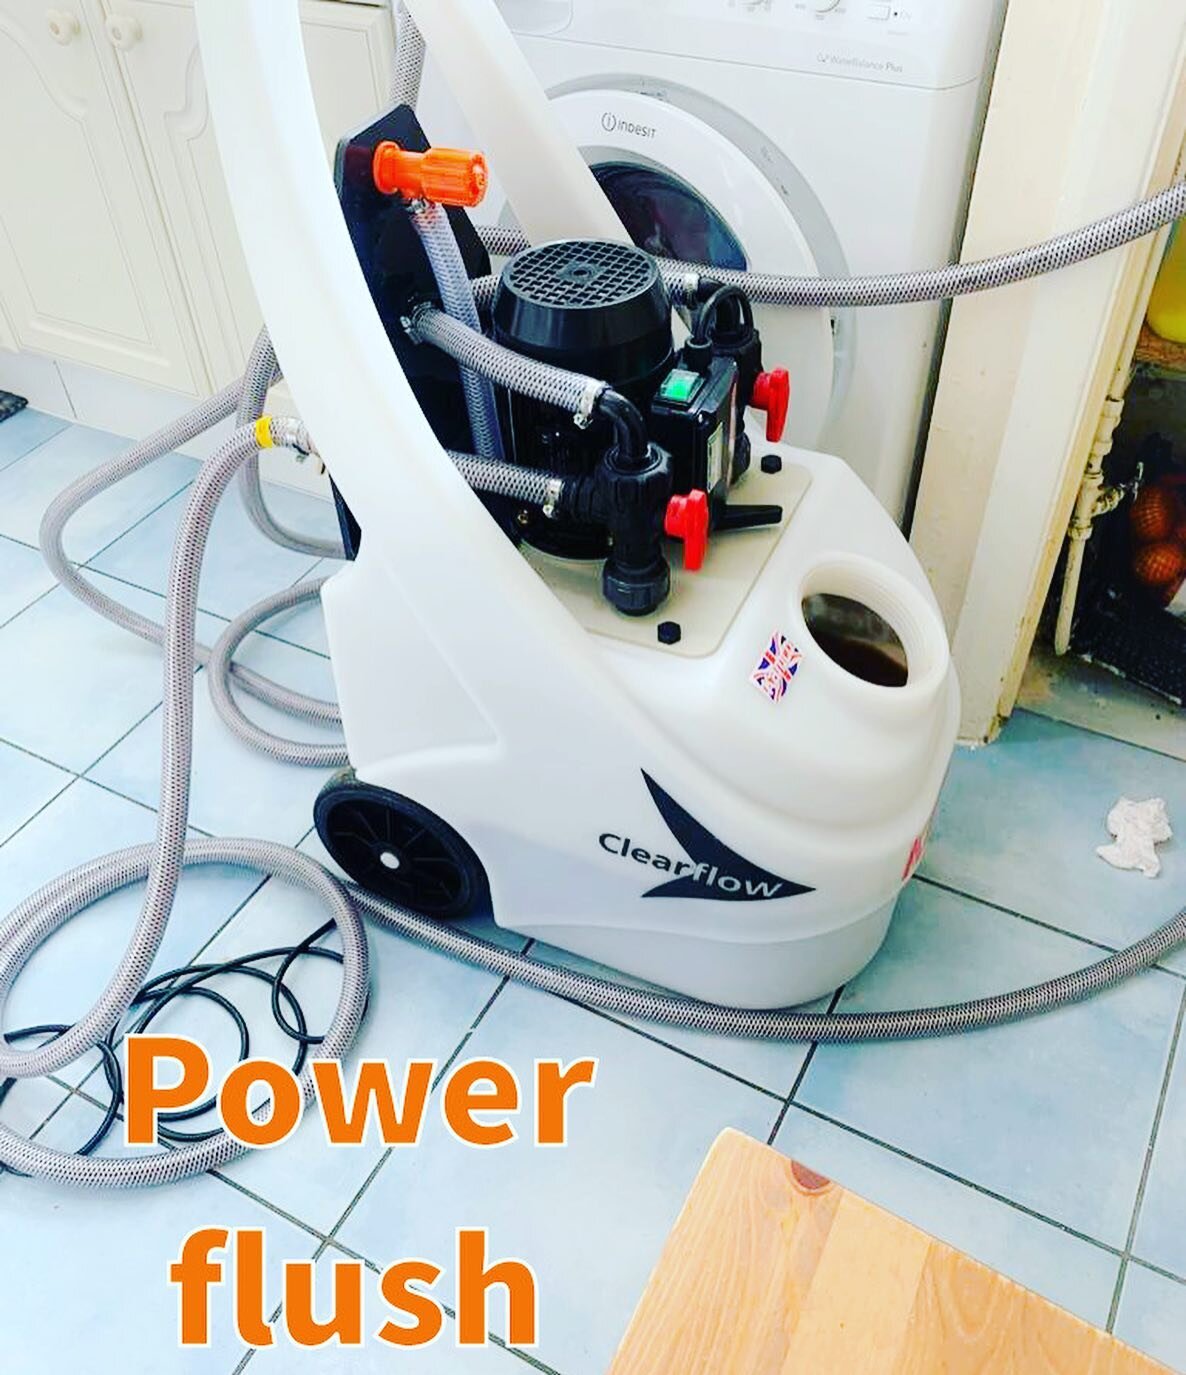 What are the benefits of getting a Powerflush?

* Enhanced energy-efficiency.
* Improved system reliability.
* Potentially lower #energy bills*
* Reduced likeliness of boiler breakdown.
* Could increase system lifespan.
* Radiators can warm up quicke